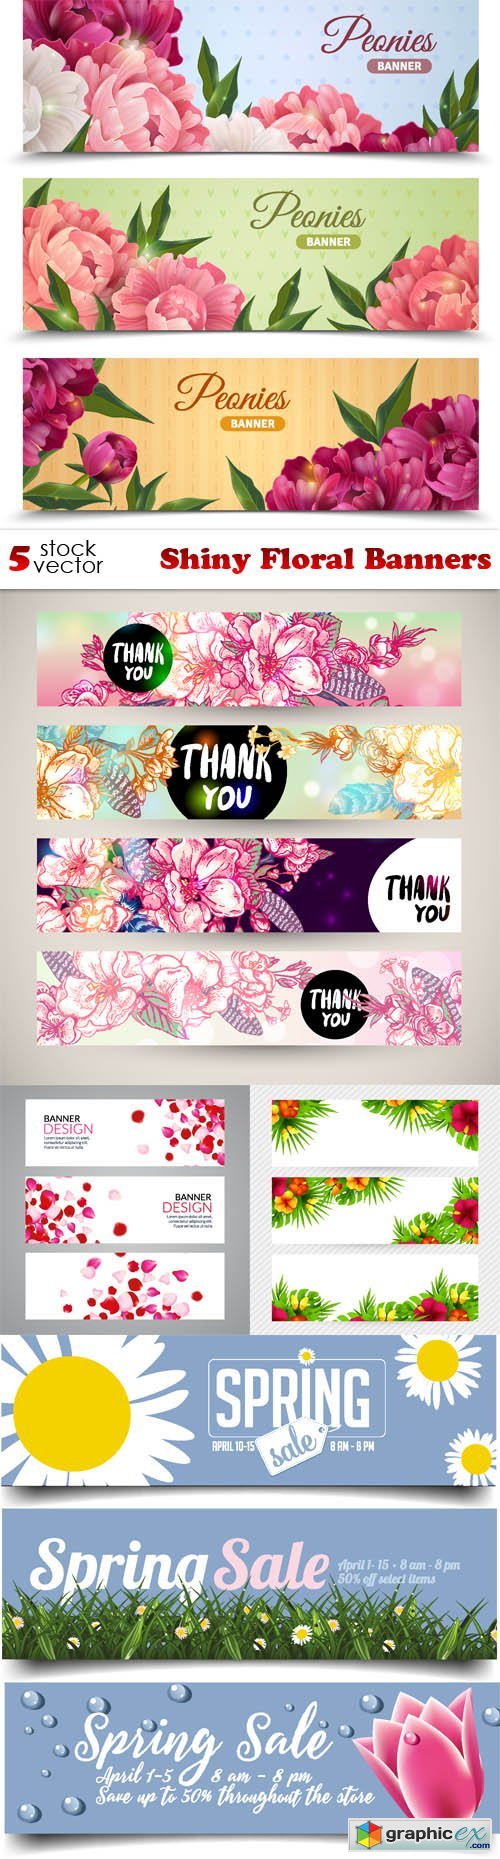 Shiny Floral Banners